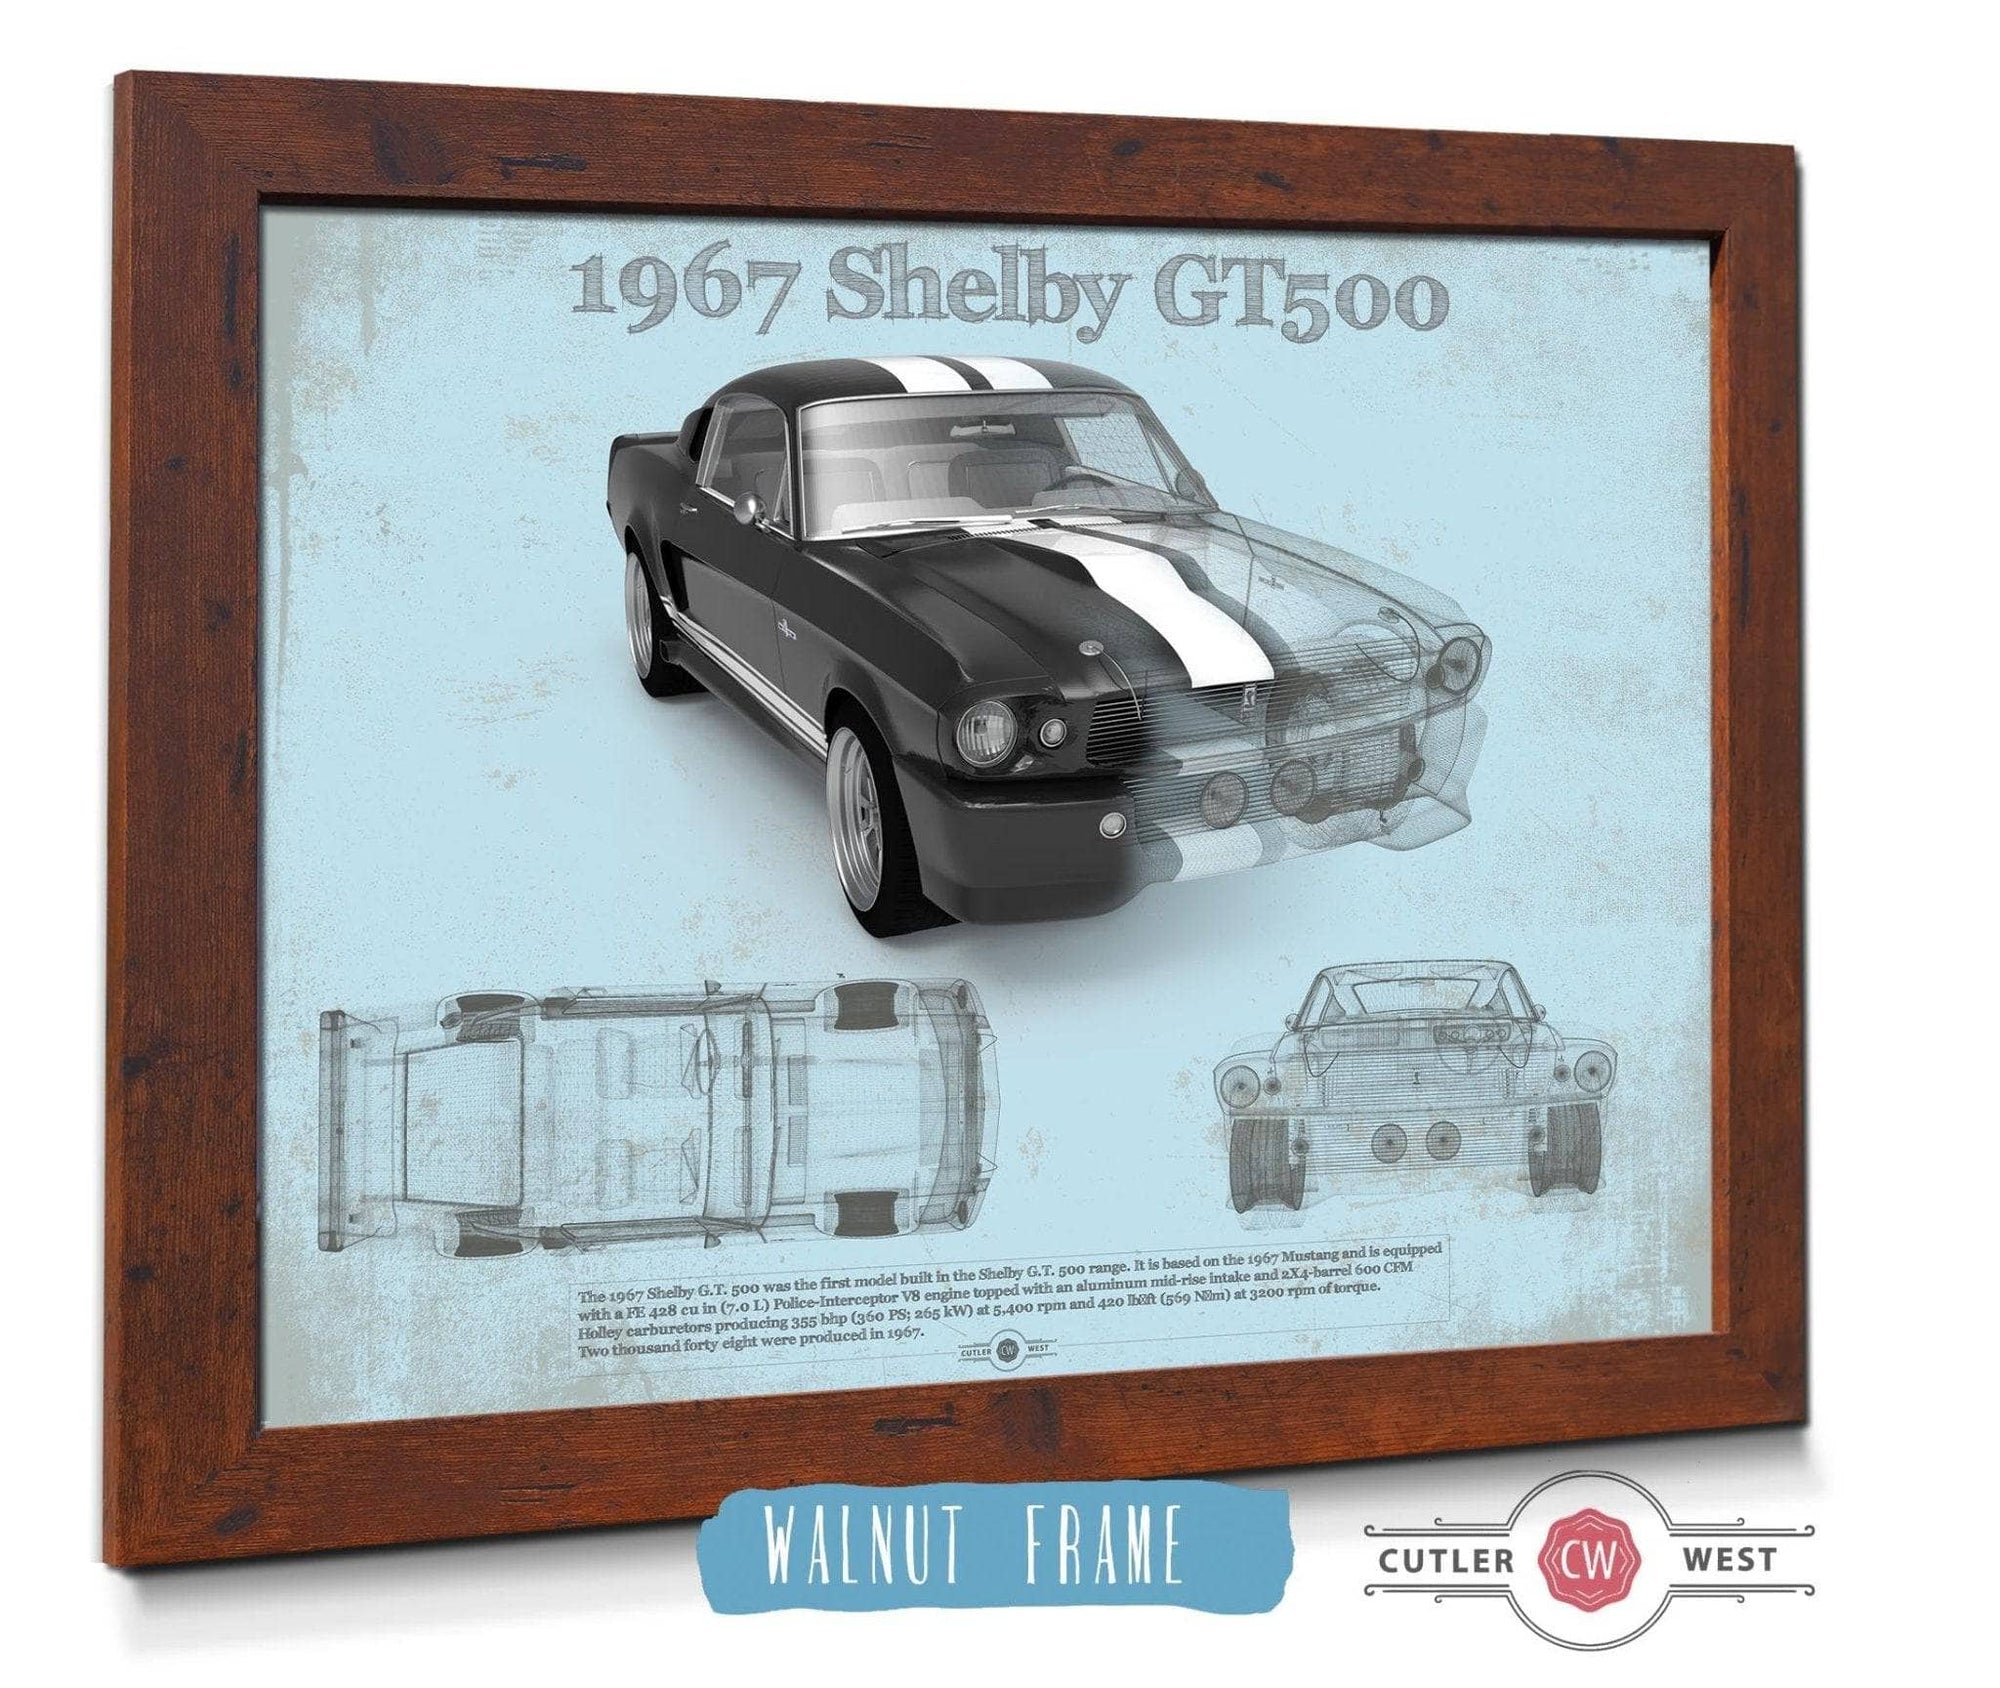 Cutler West Ford Collection Shelby Mustang GT500 Blueprint Vintage Auto Print